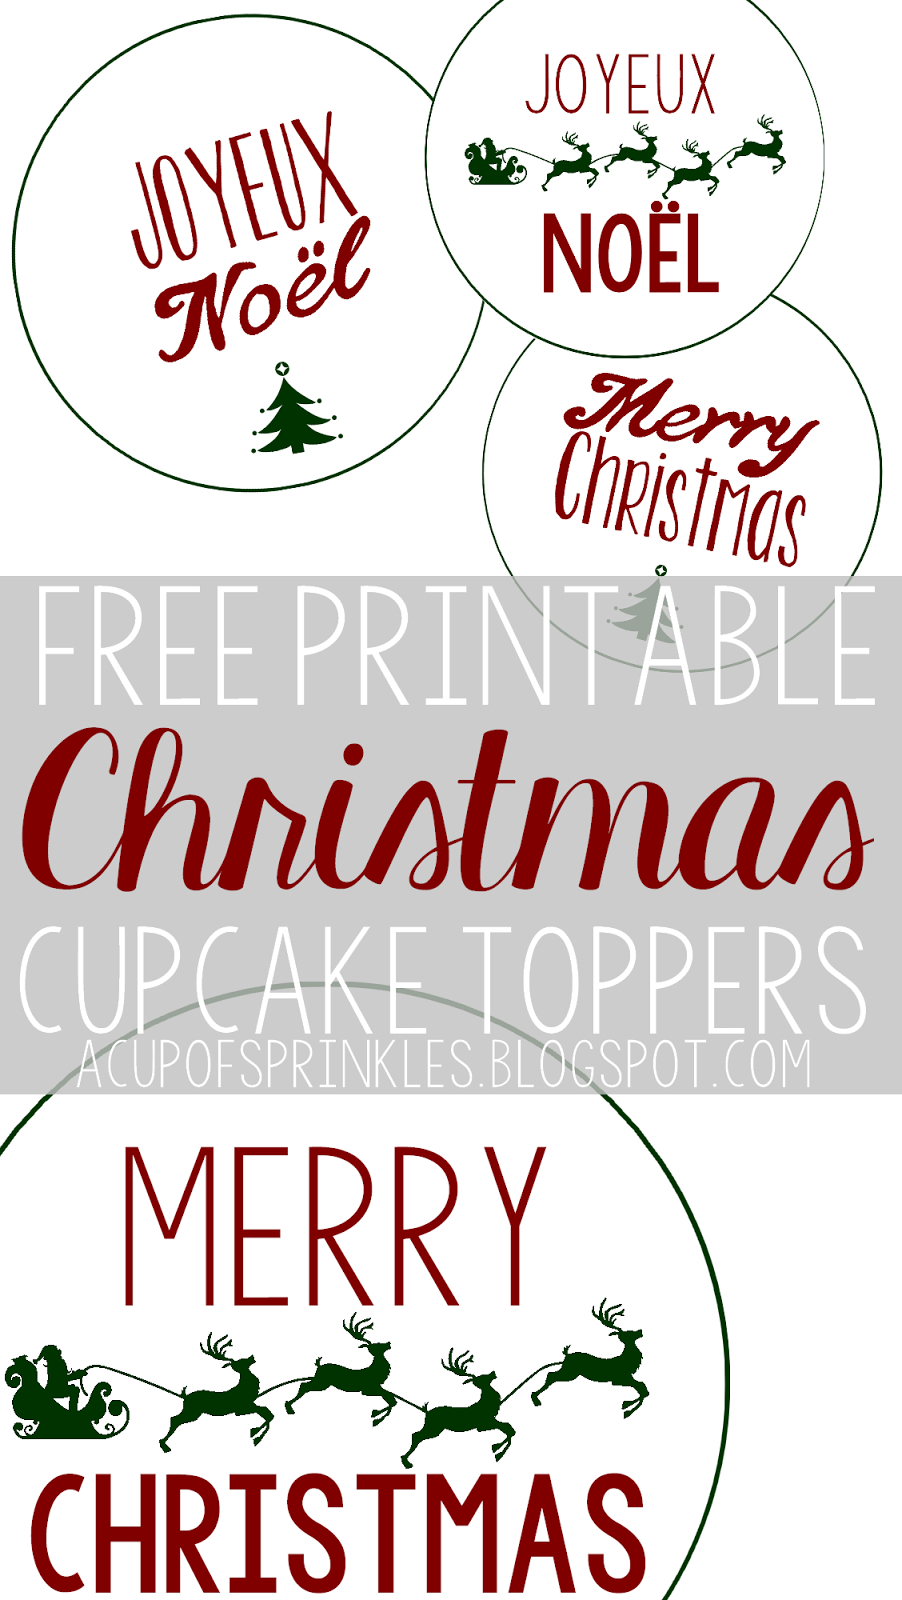 Free Printable : Christmas Cupcake Toppers | A Cup Of Sprinkles - Free Printable Christmas Designs